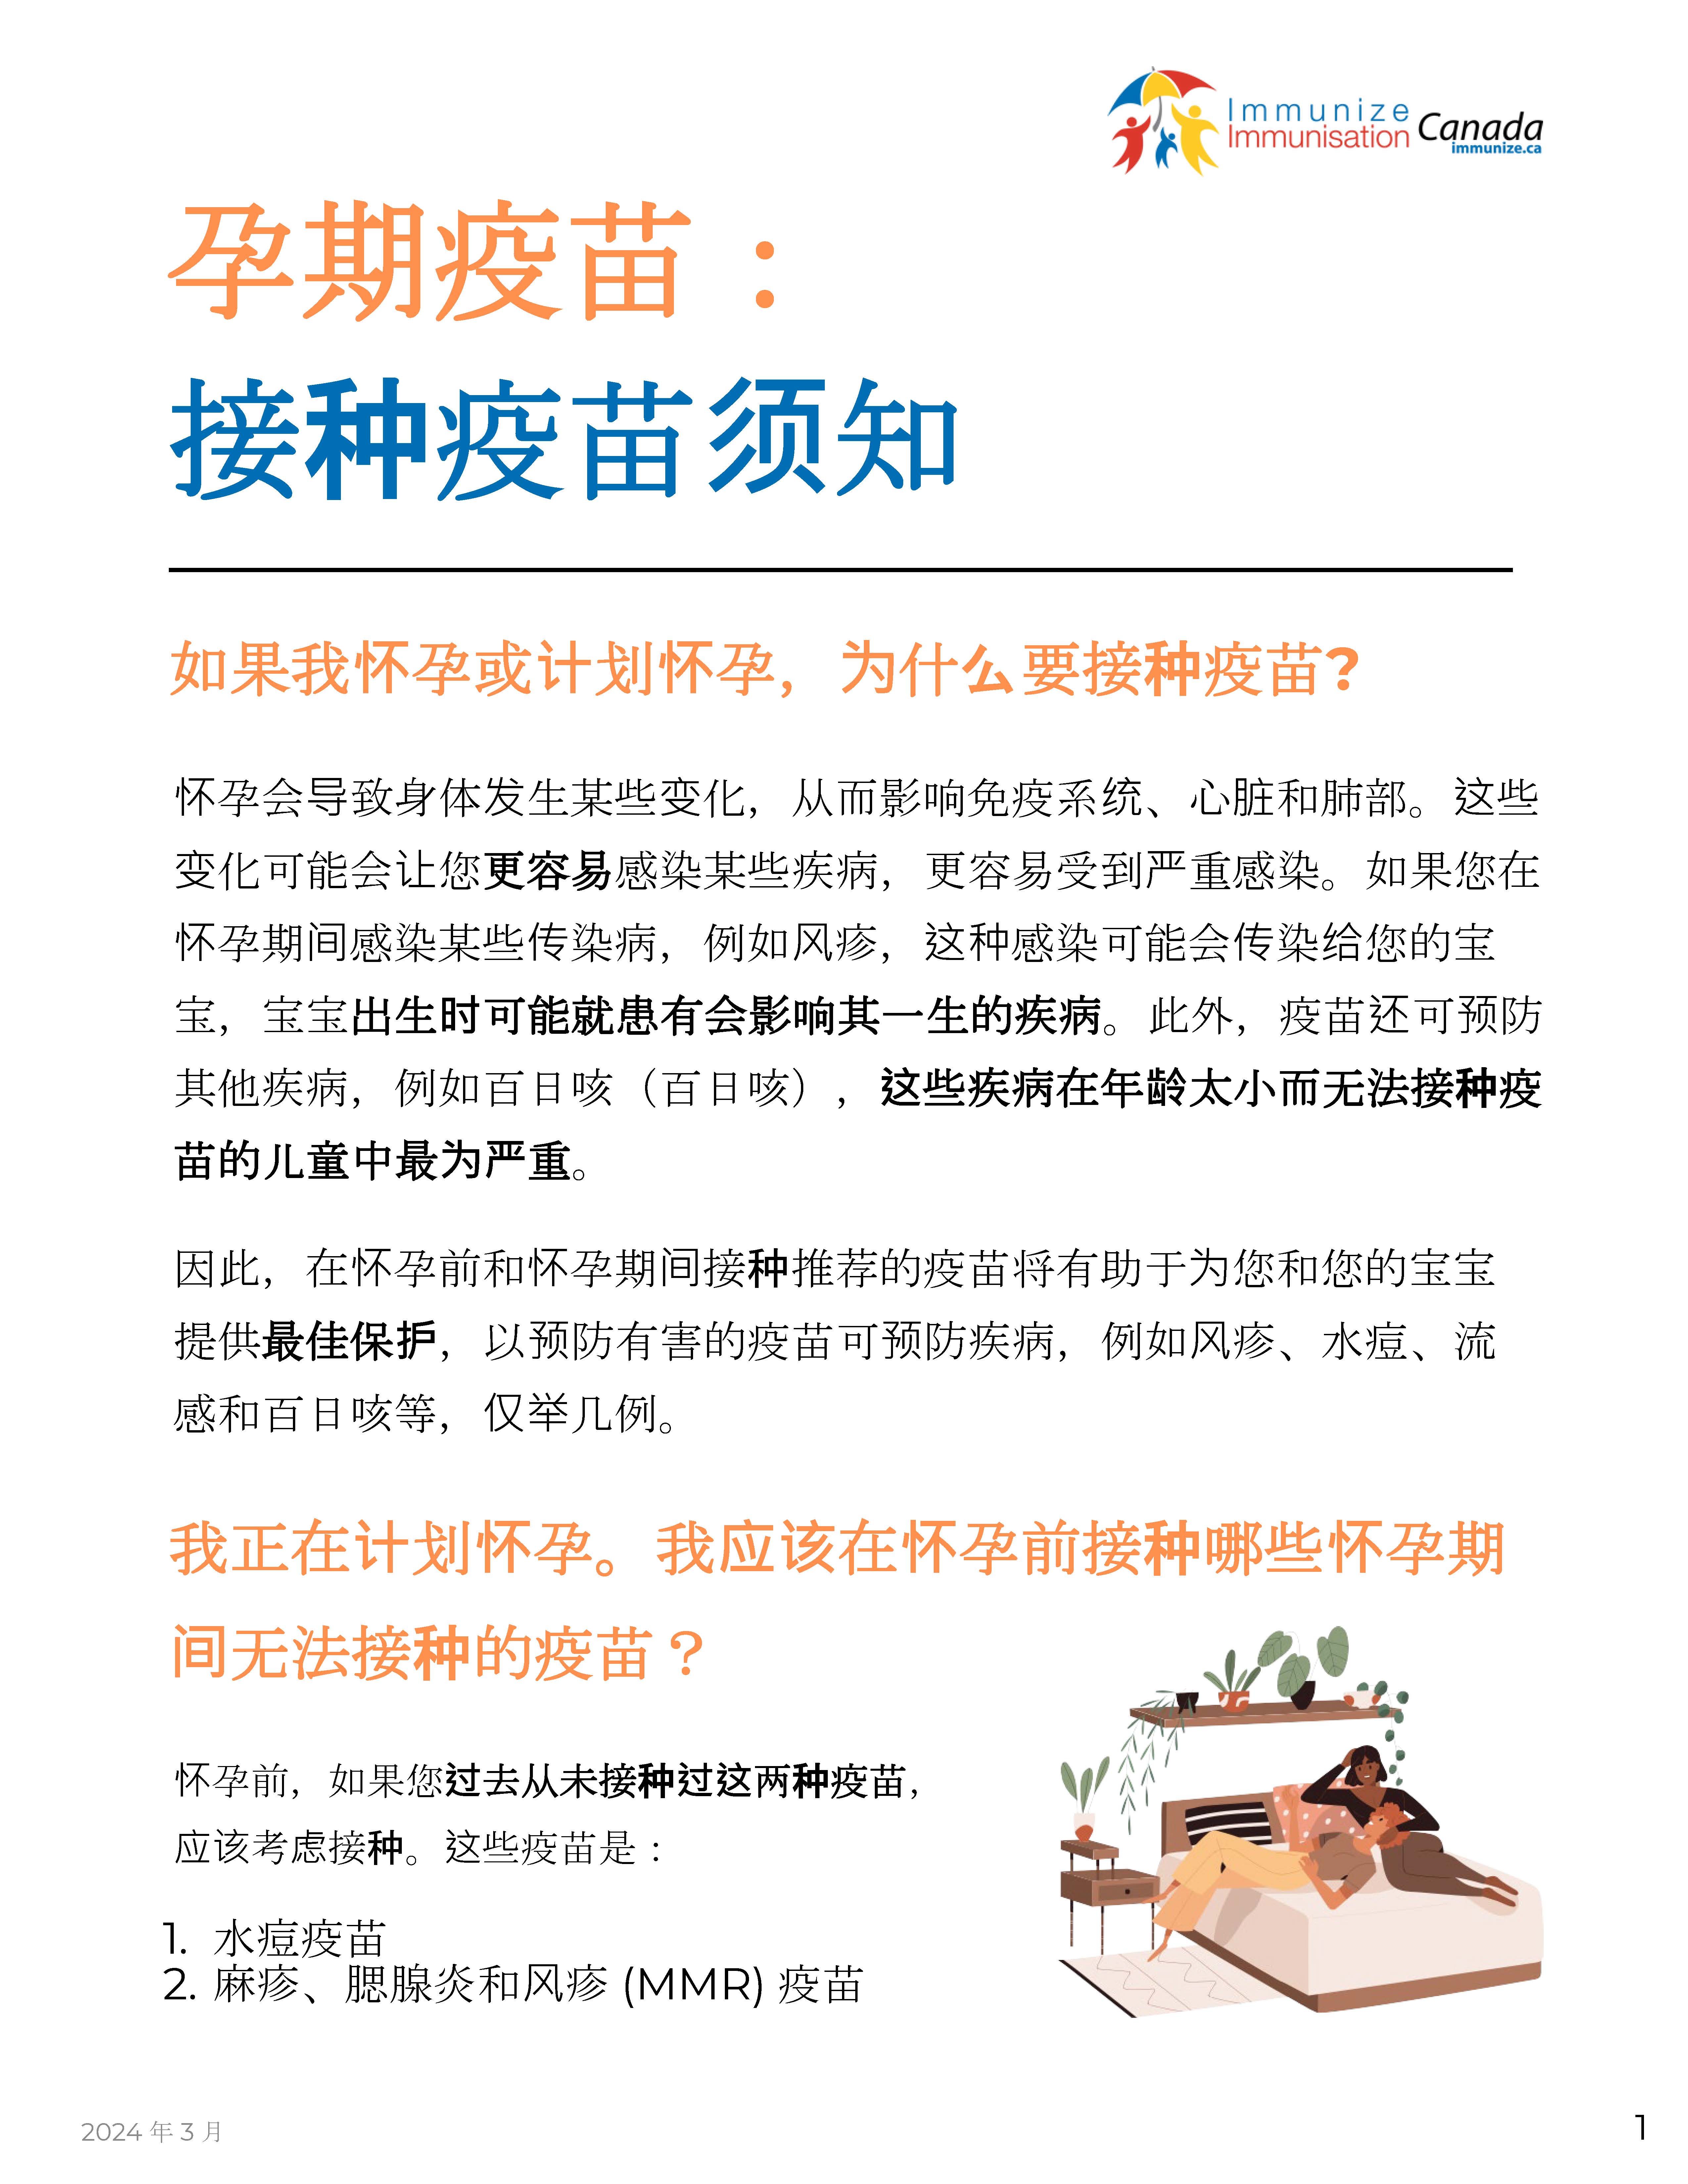 Vaccines in Pregnancy: What you need to know (factsheet in Mandarin)